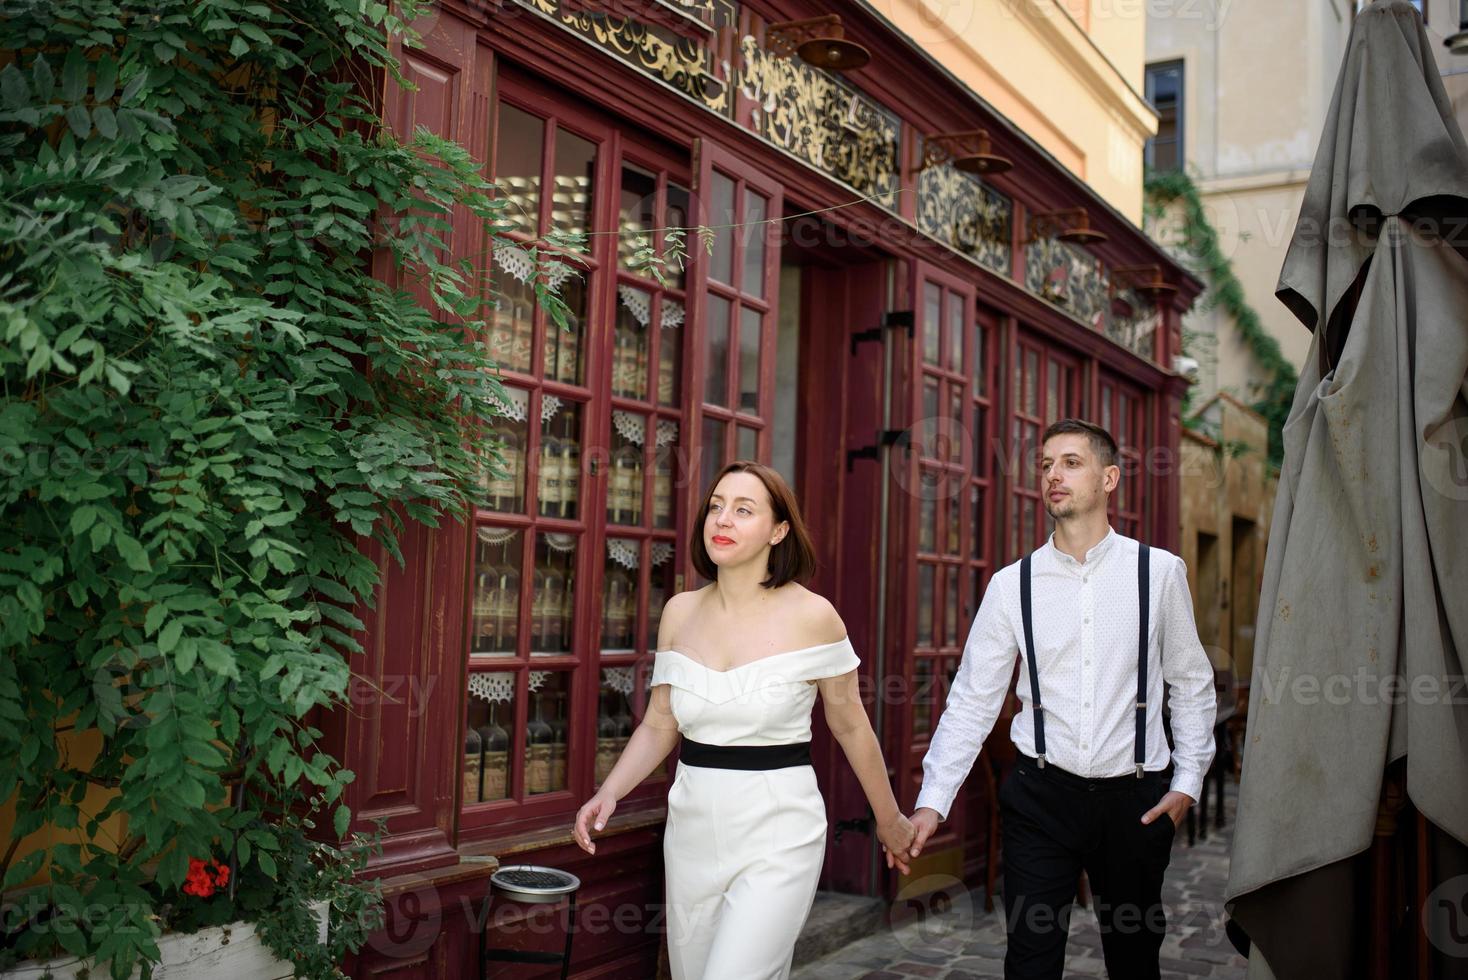 Beautiful stylish couple on a date on the streets in the old city. photo